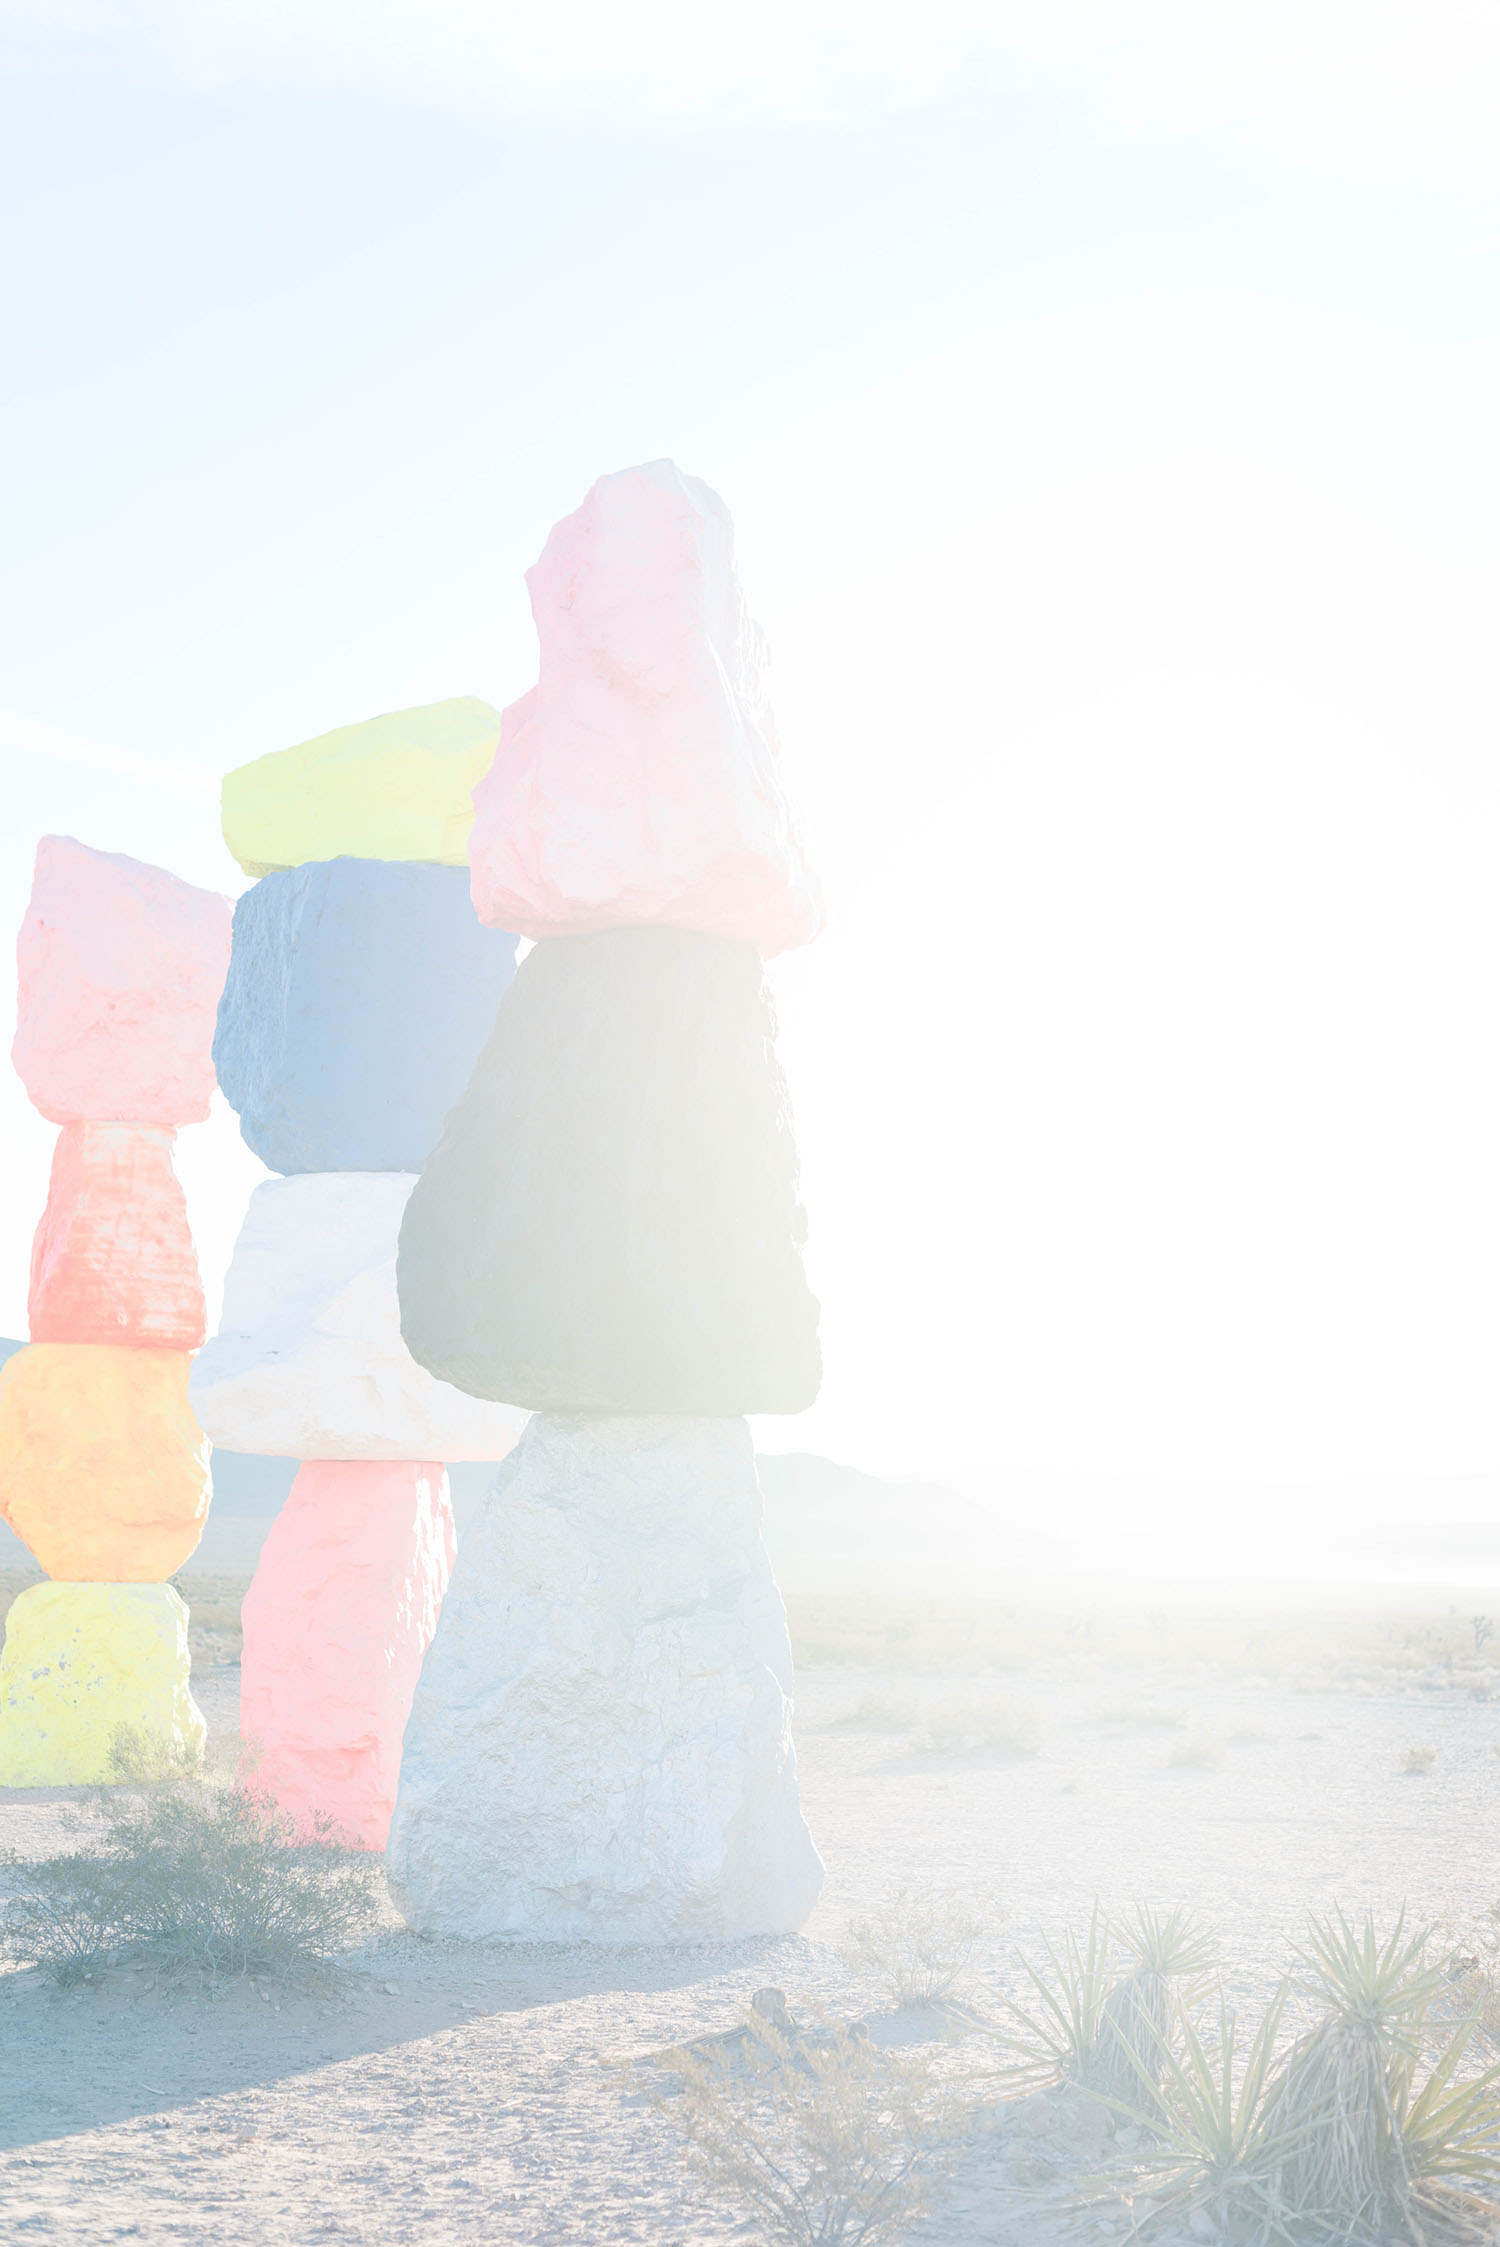 Three colourful stone formations at sunrise in the Las Vegas desert at Seven Magic mountains, as photographed by Winnipeg travel blogger Cee Fardoe of Coco & Vera